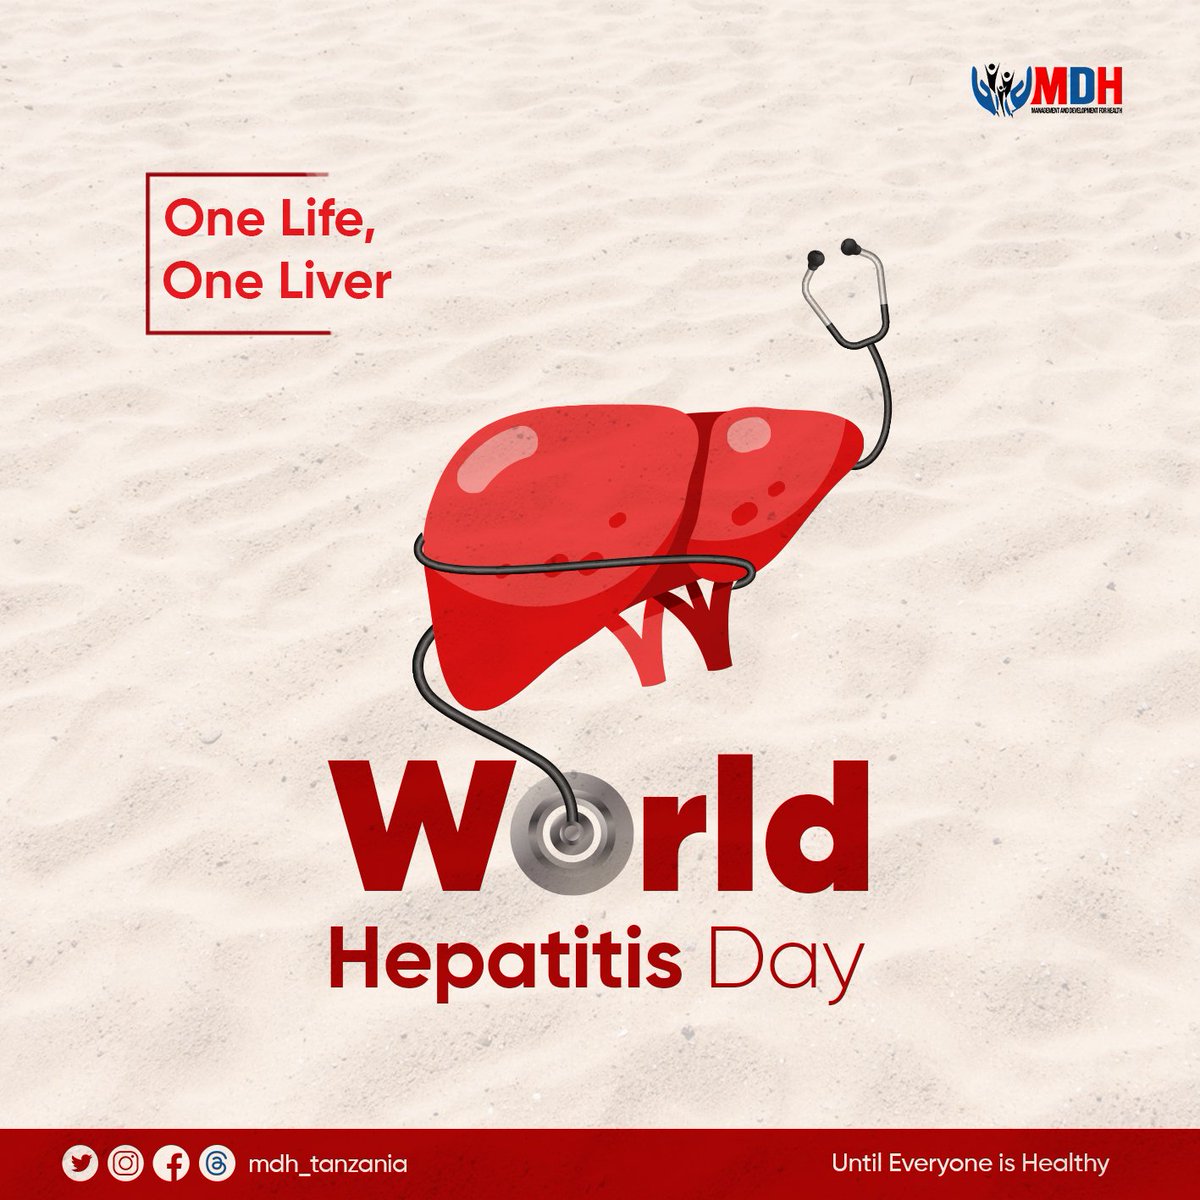 Hepatitis is one of the most dangerous diseases; viral hepatitis B and C is responsible for over 1million deaths globally every year.
Get tested today and get vaccinated!
#HepCantWait 

#OneLifeOneLiver #untileveryoneishealthy